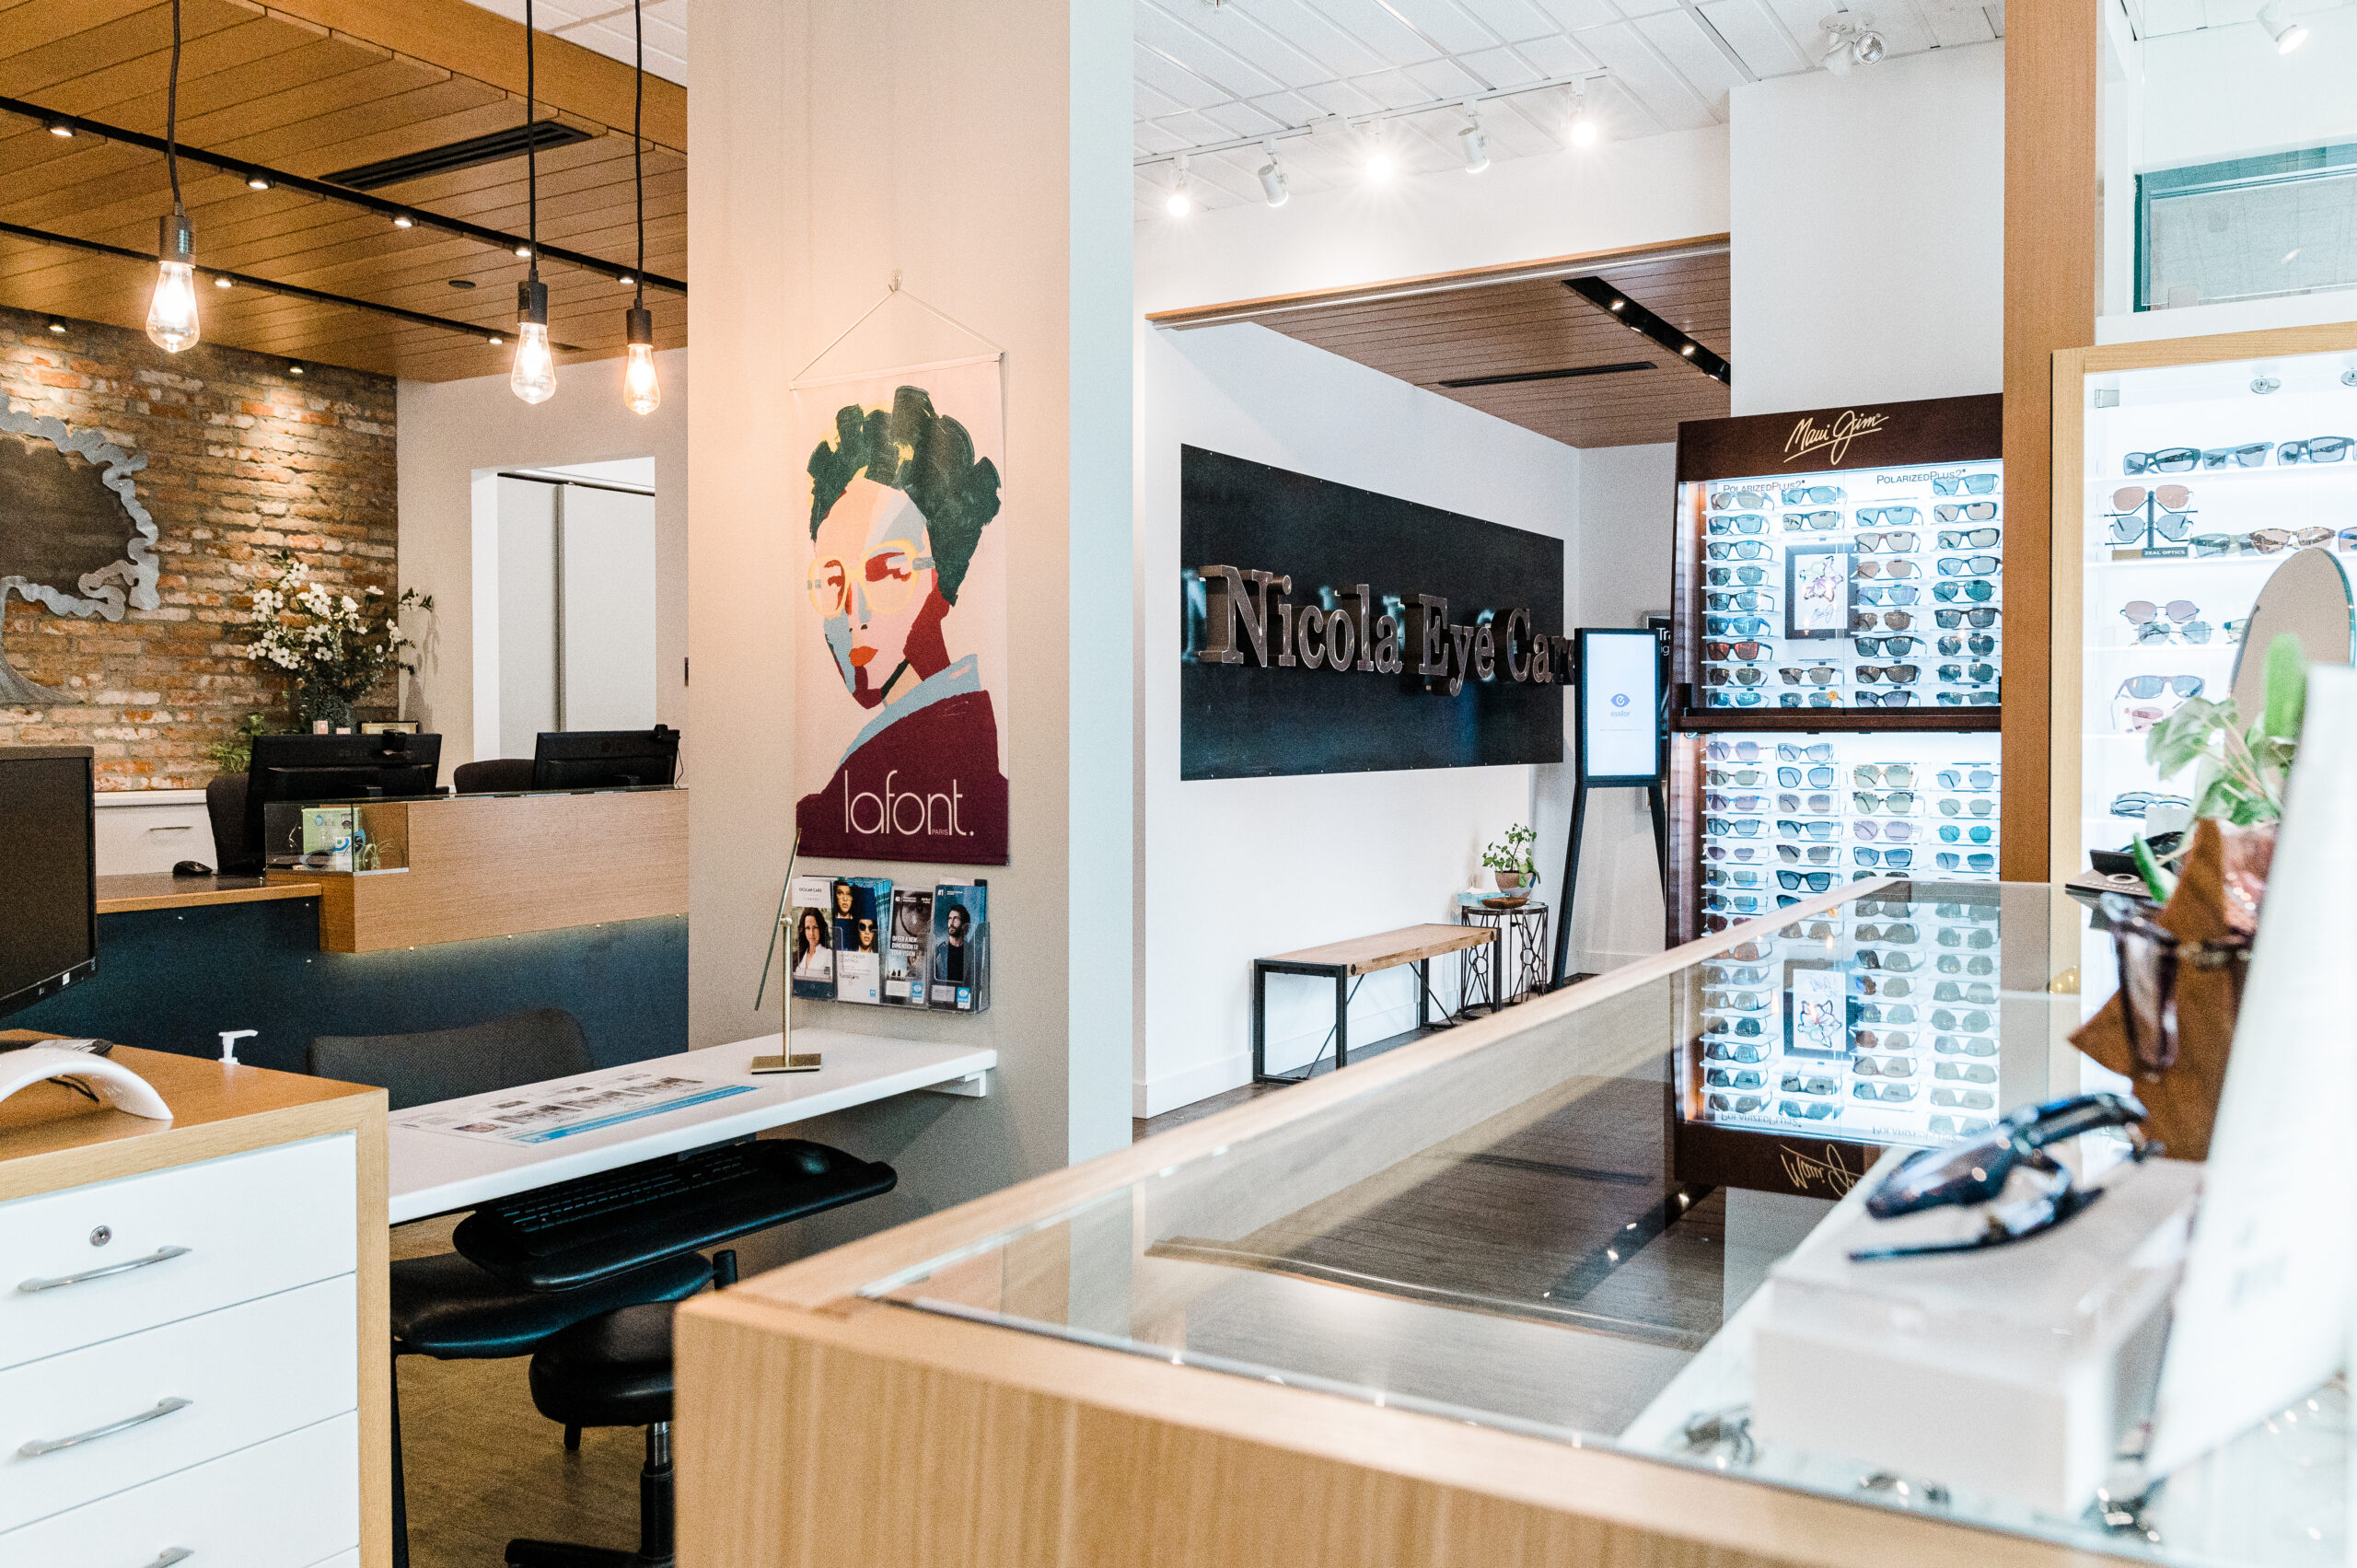 The inside of Nicola Eye Care, an eye clinic in Kamloops offering eye exams, sunglasses, glasses, contacts, and more.